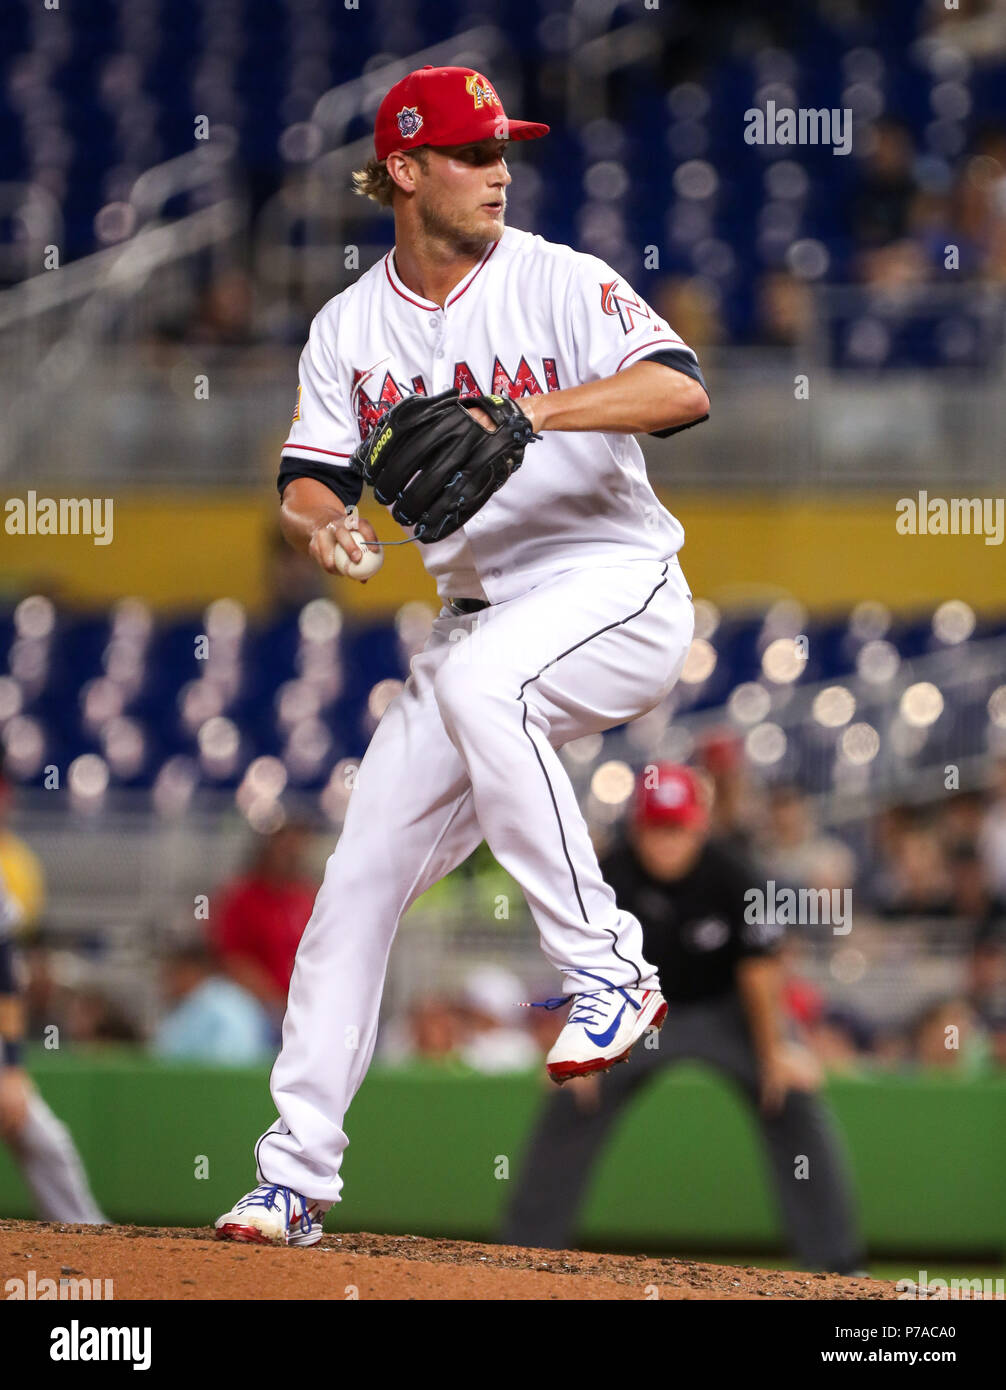 July 03, 2018: Miami Marlins relief pitcher Drew Steckenrider (71) prepares to pitch in the seventh inning during a MLB game between the Tampa Bay Rays and the Miami Marlins at the Marlins Park, in Miami, Florida. The Rays won 9-6 in the 16th inning. Mario Houben/CSM Stock Photo